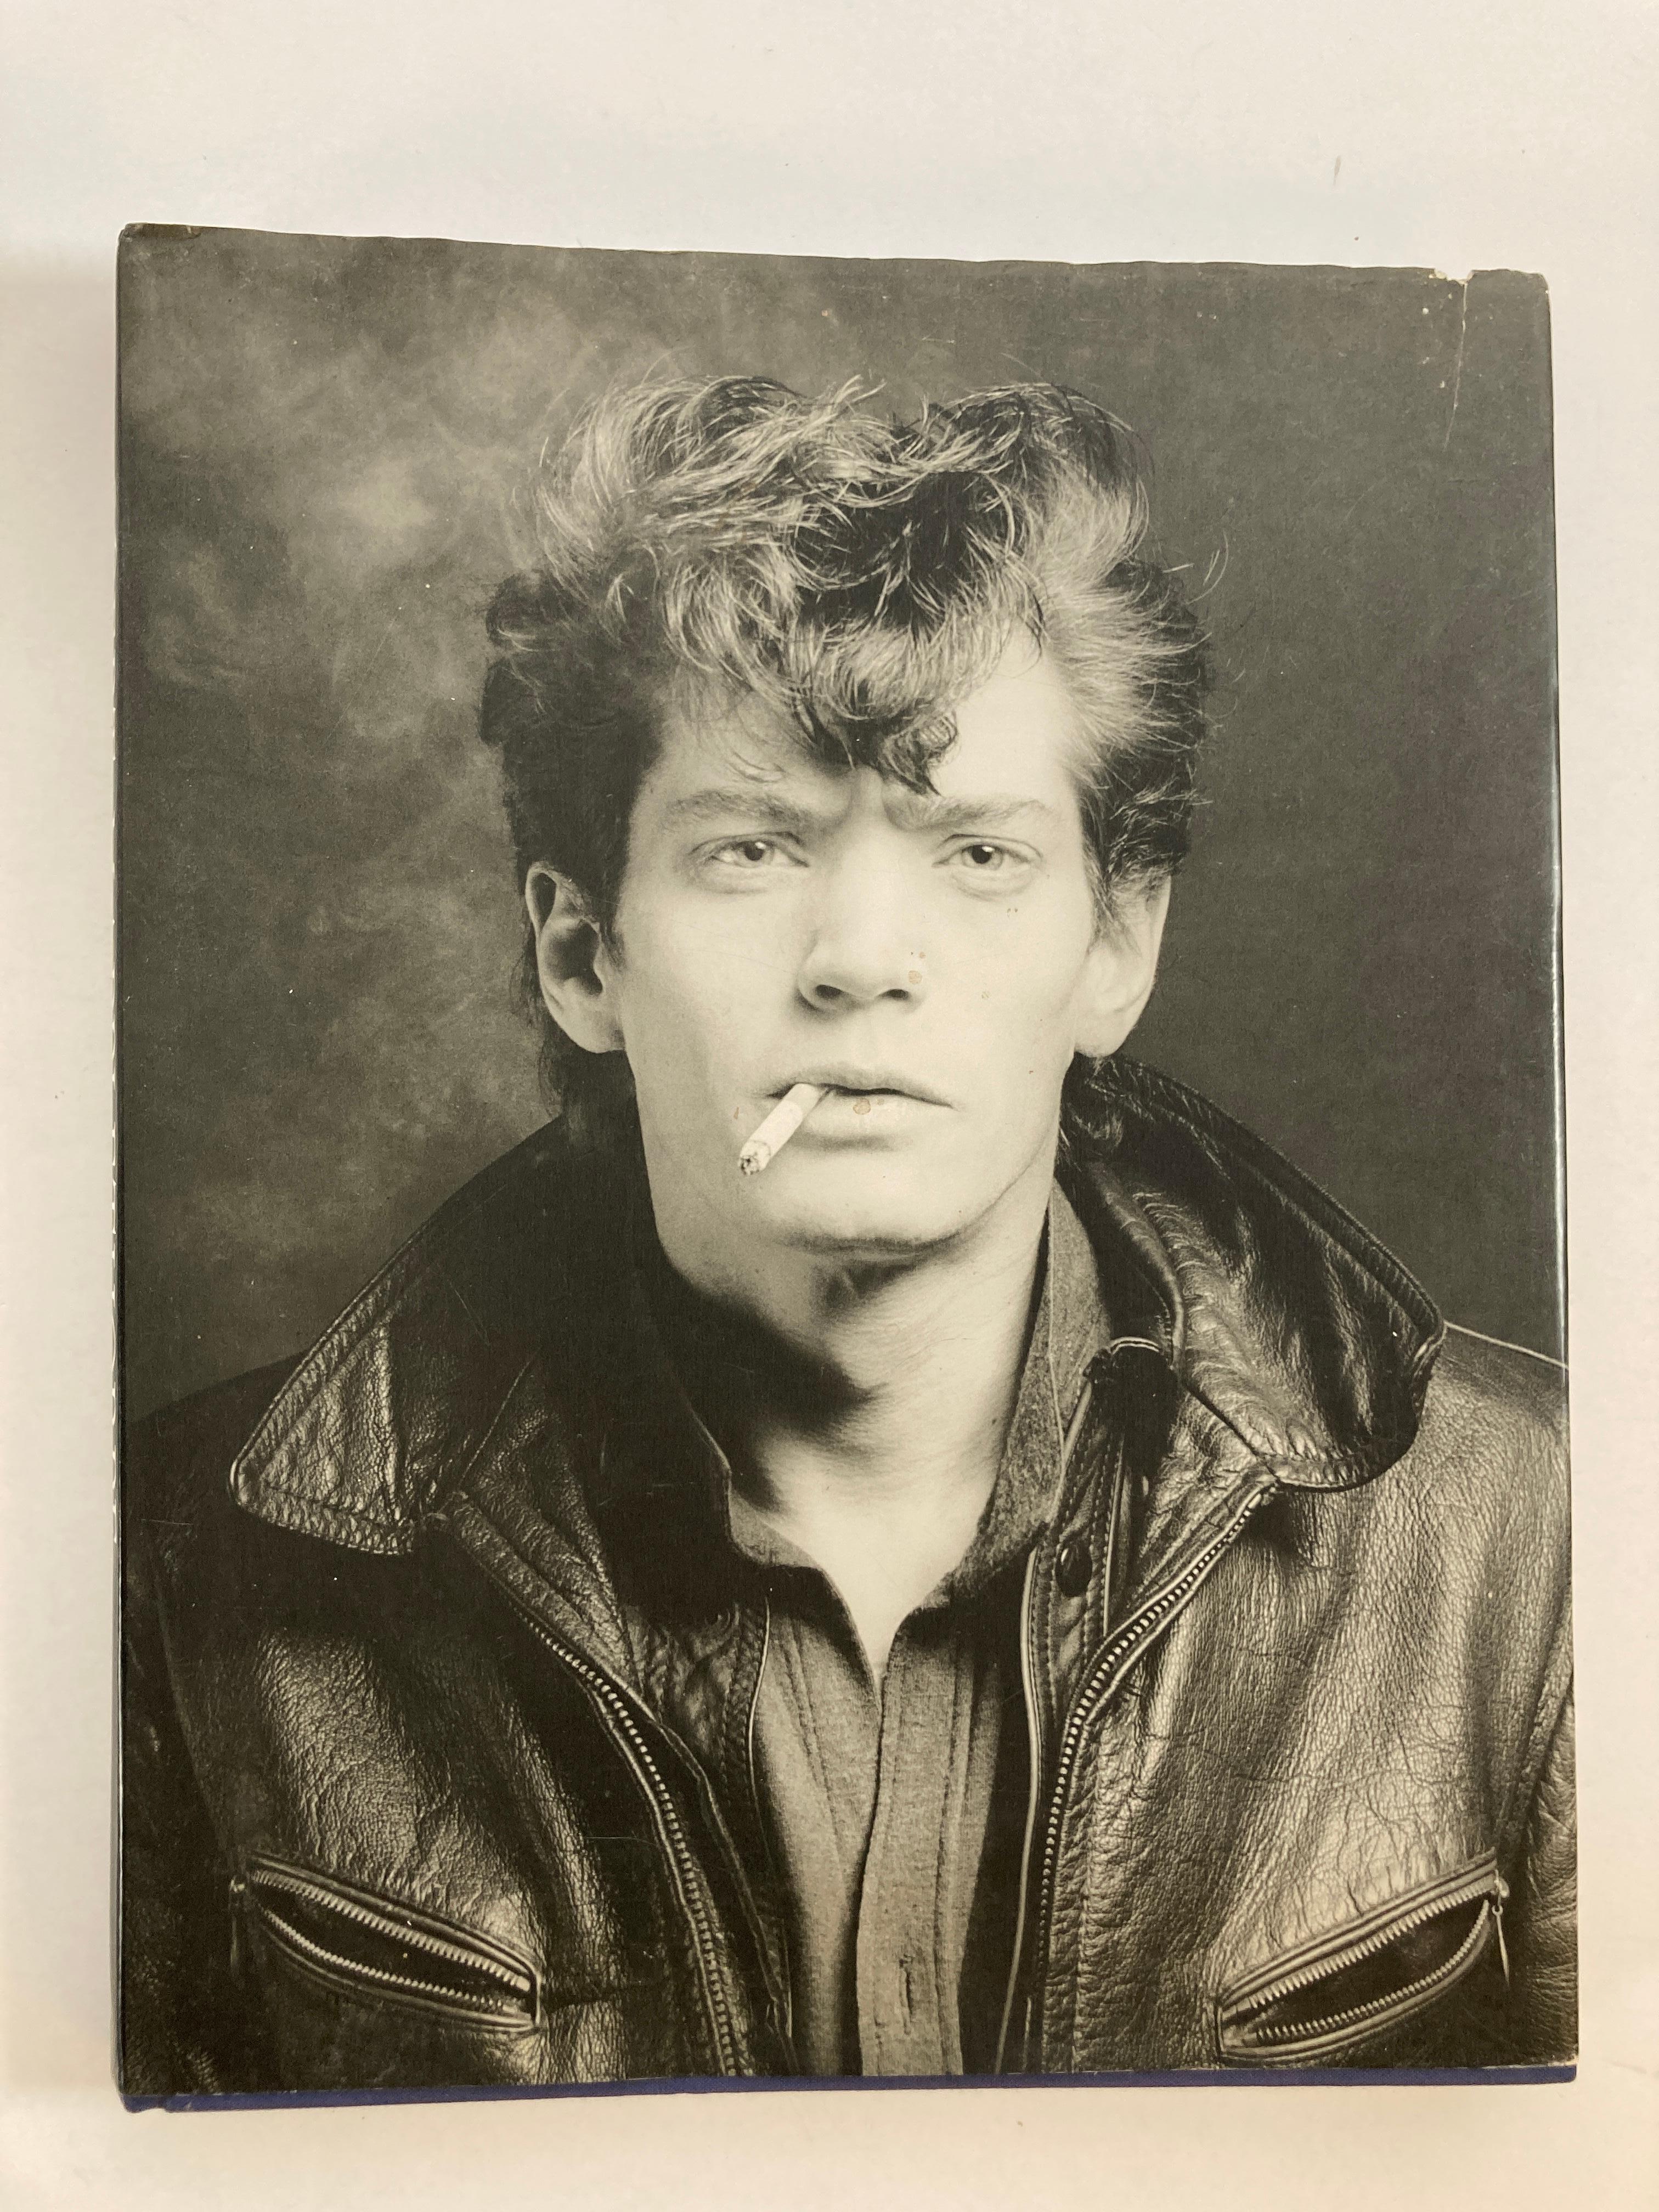 Mapplethorpe Portraits
Book by Robert Mapplethorpe and Robin Gibson.
Robert Mapplethorpe : certain people : book of portraits
Mapplethorpe, Robert
Published by Pasadena, Calif. : 
Twelvetrees Press, [1985], 1991
comprehensive overview of